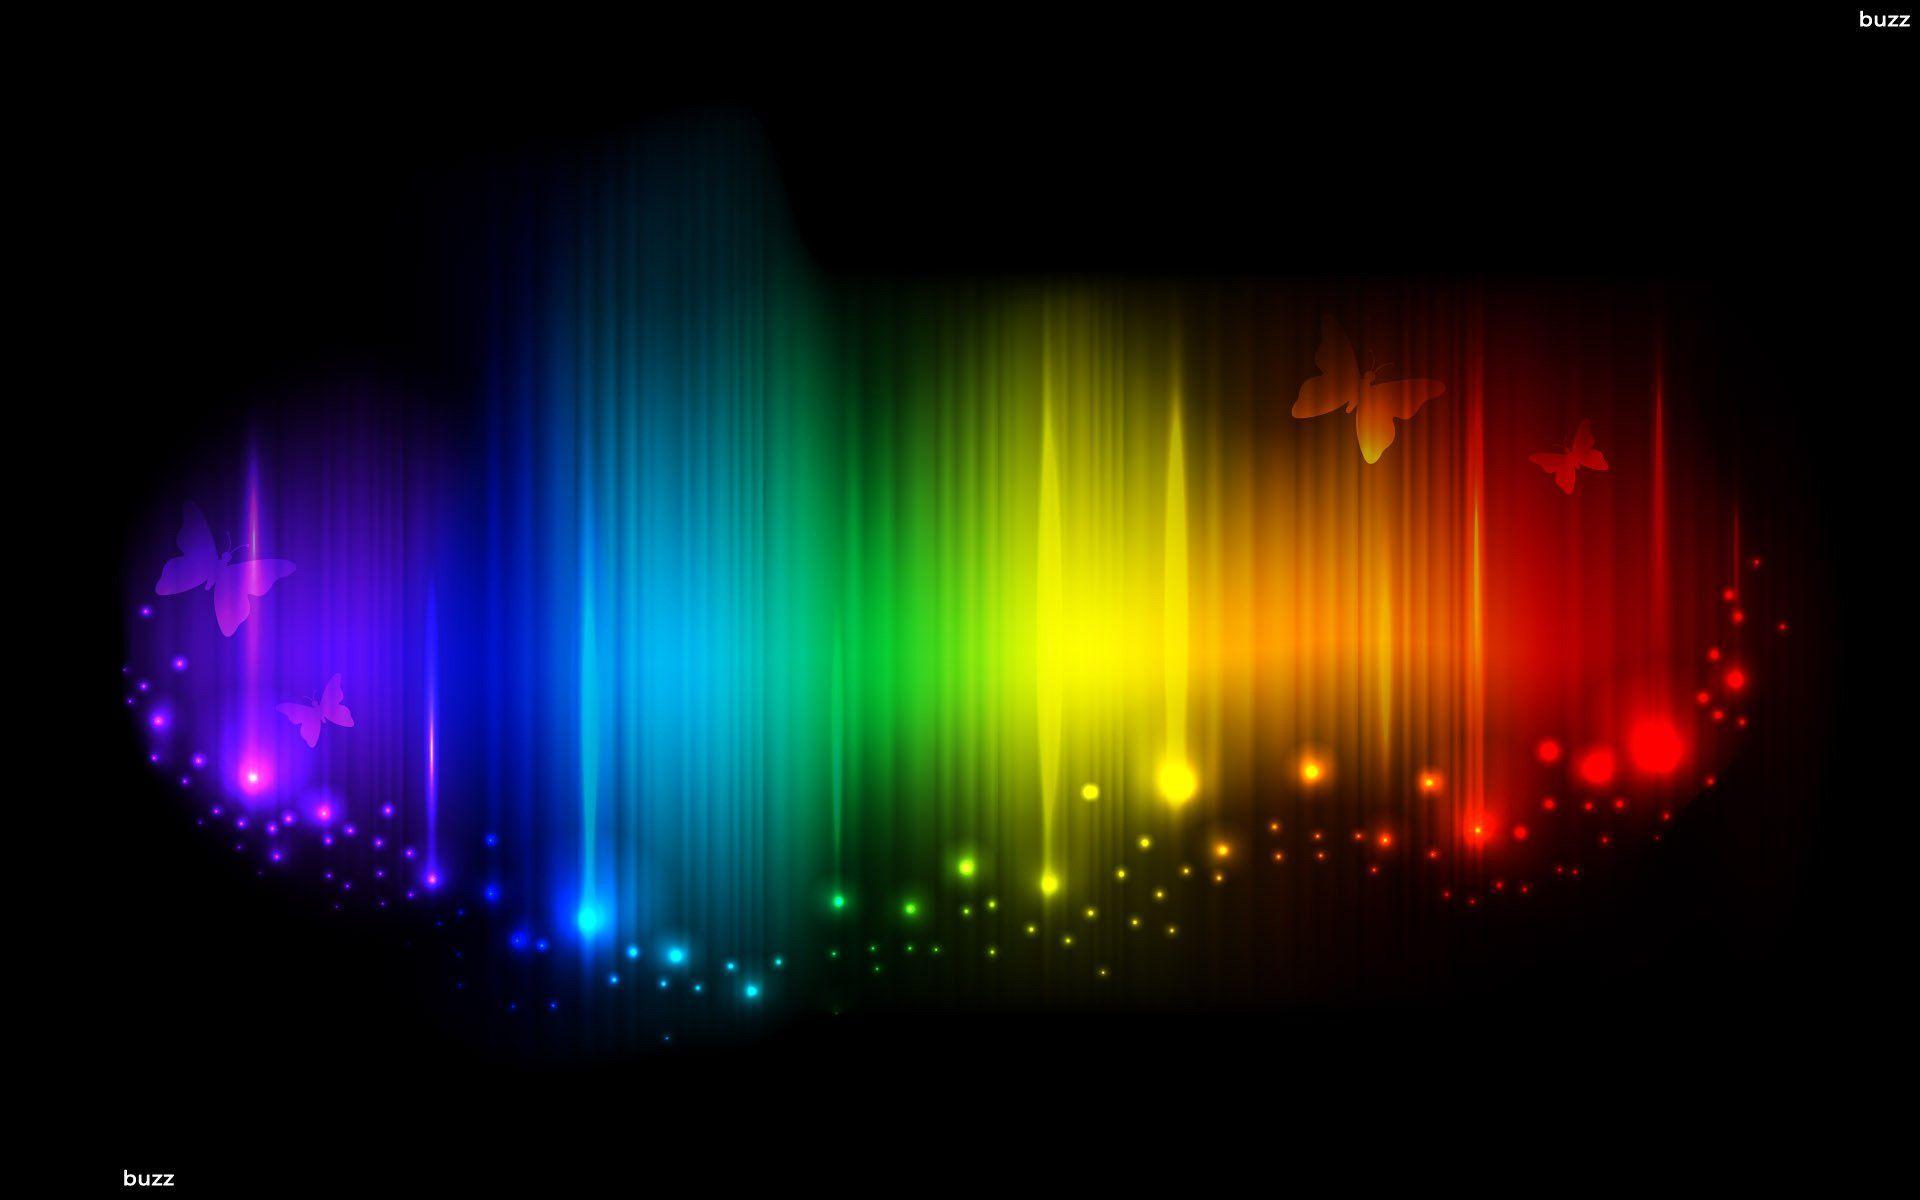 Abstract Rainbow Wallpaper HD wallpaper search